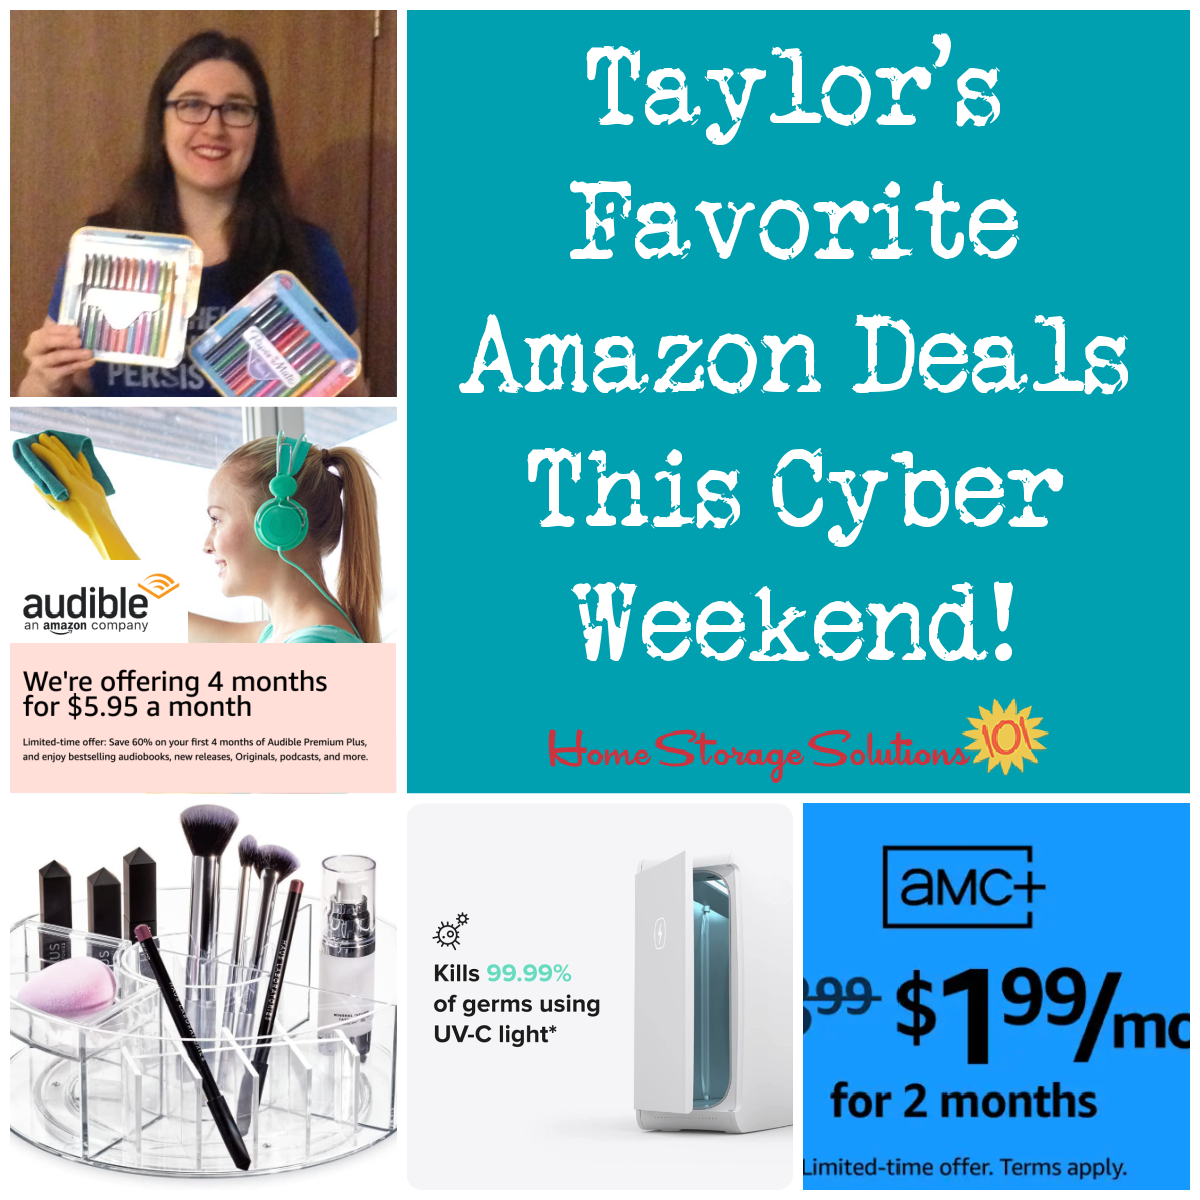 Taylor's favorite Amazon deals this Cyber Weekend